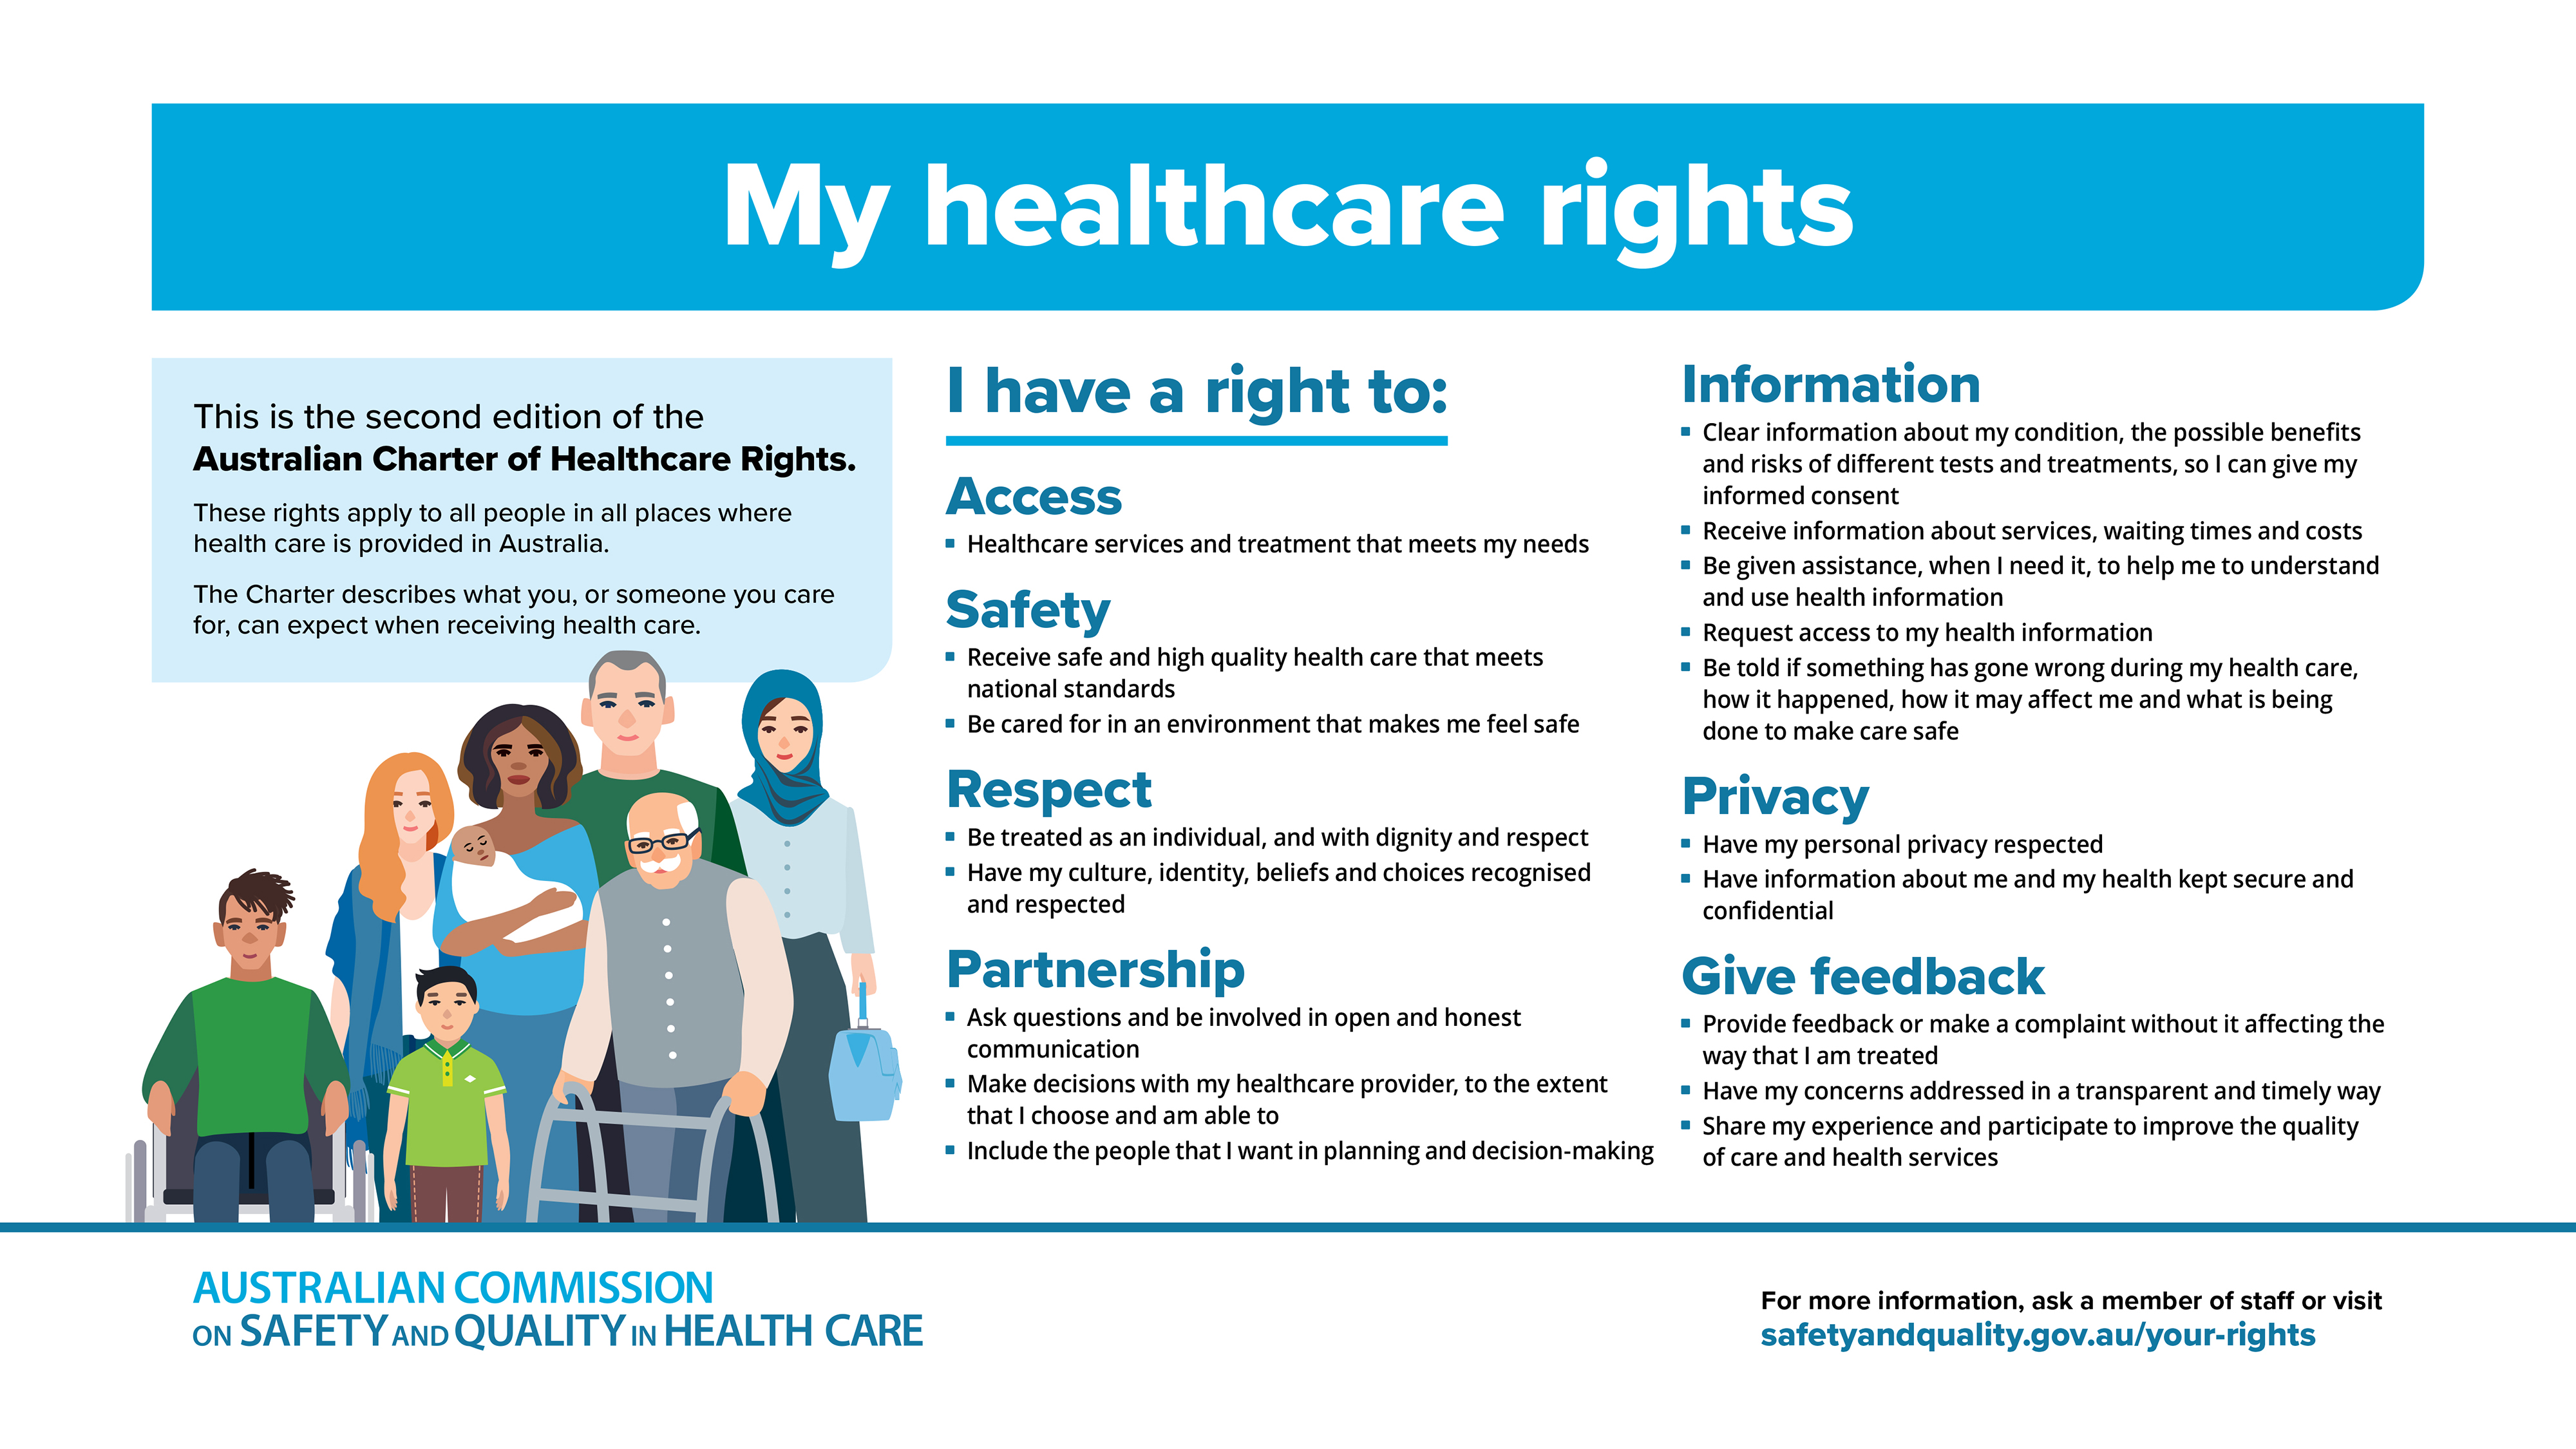 Leaflet for My healthcare rights